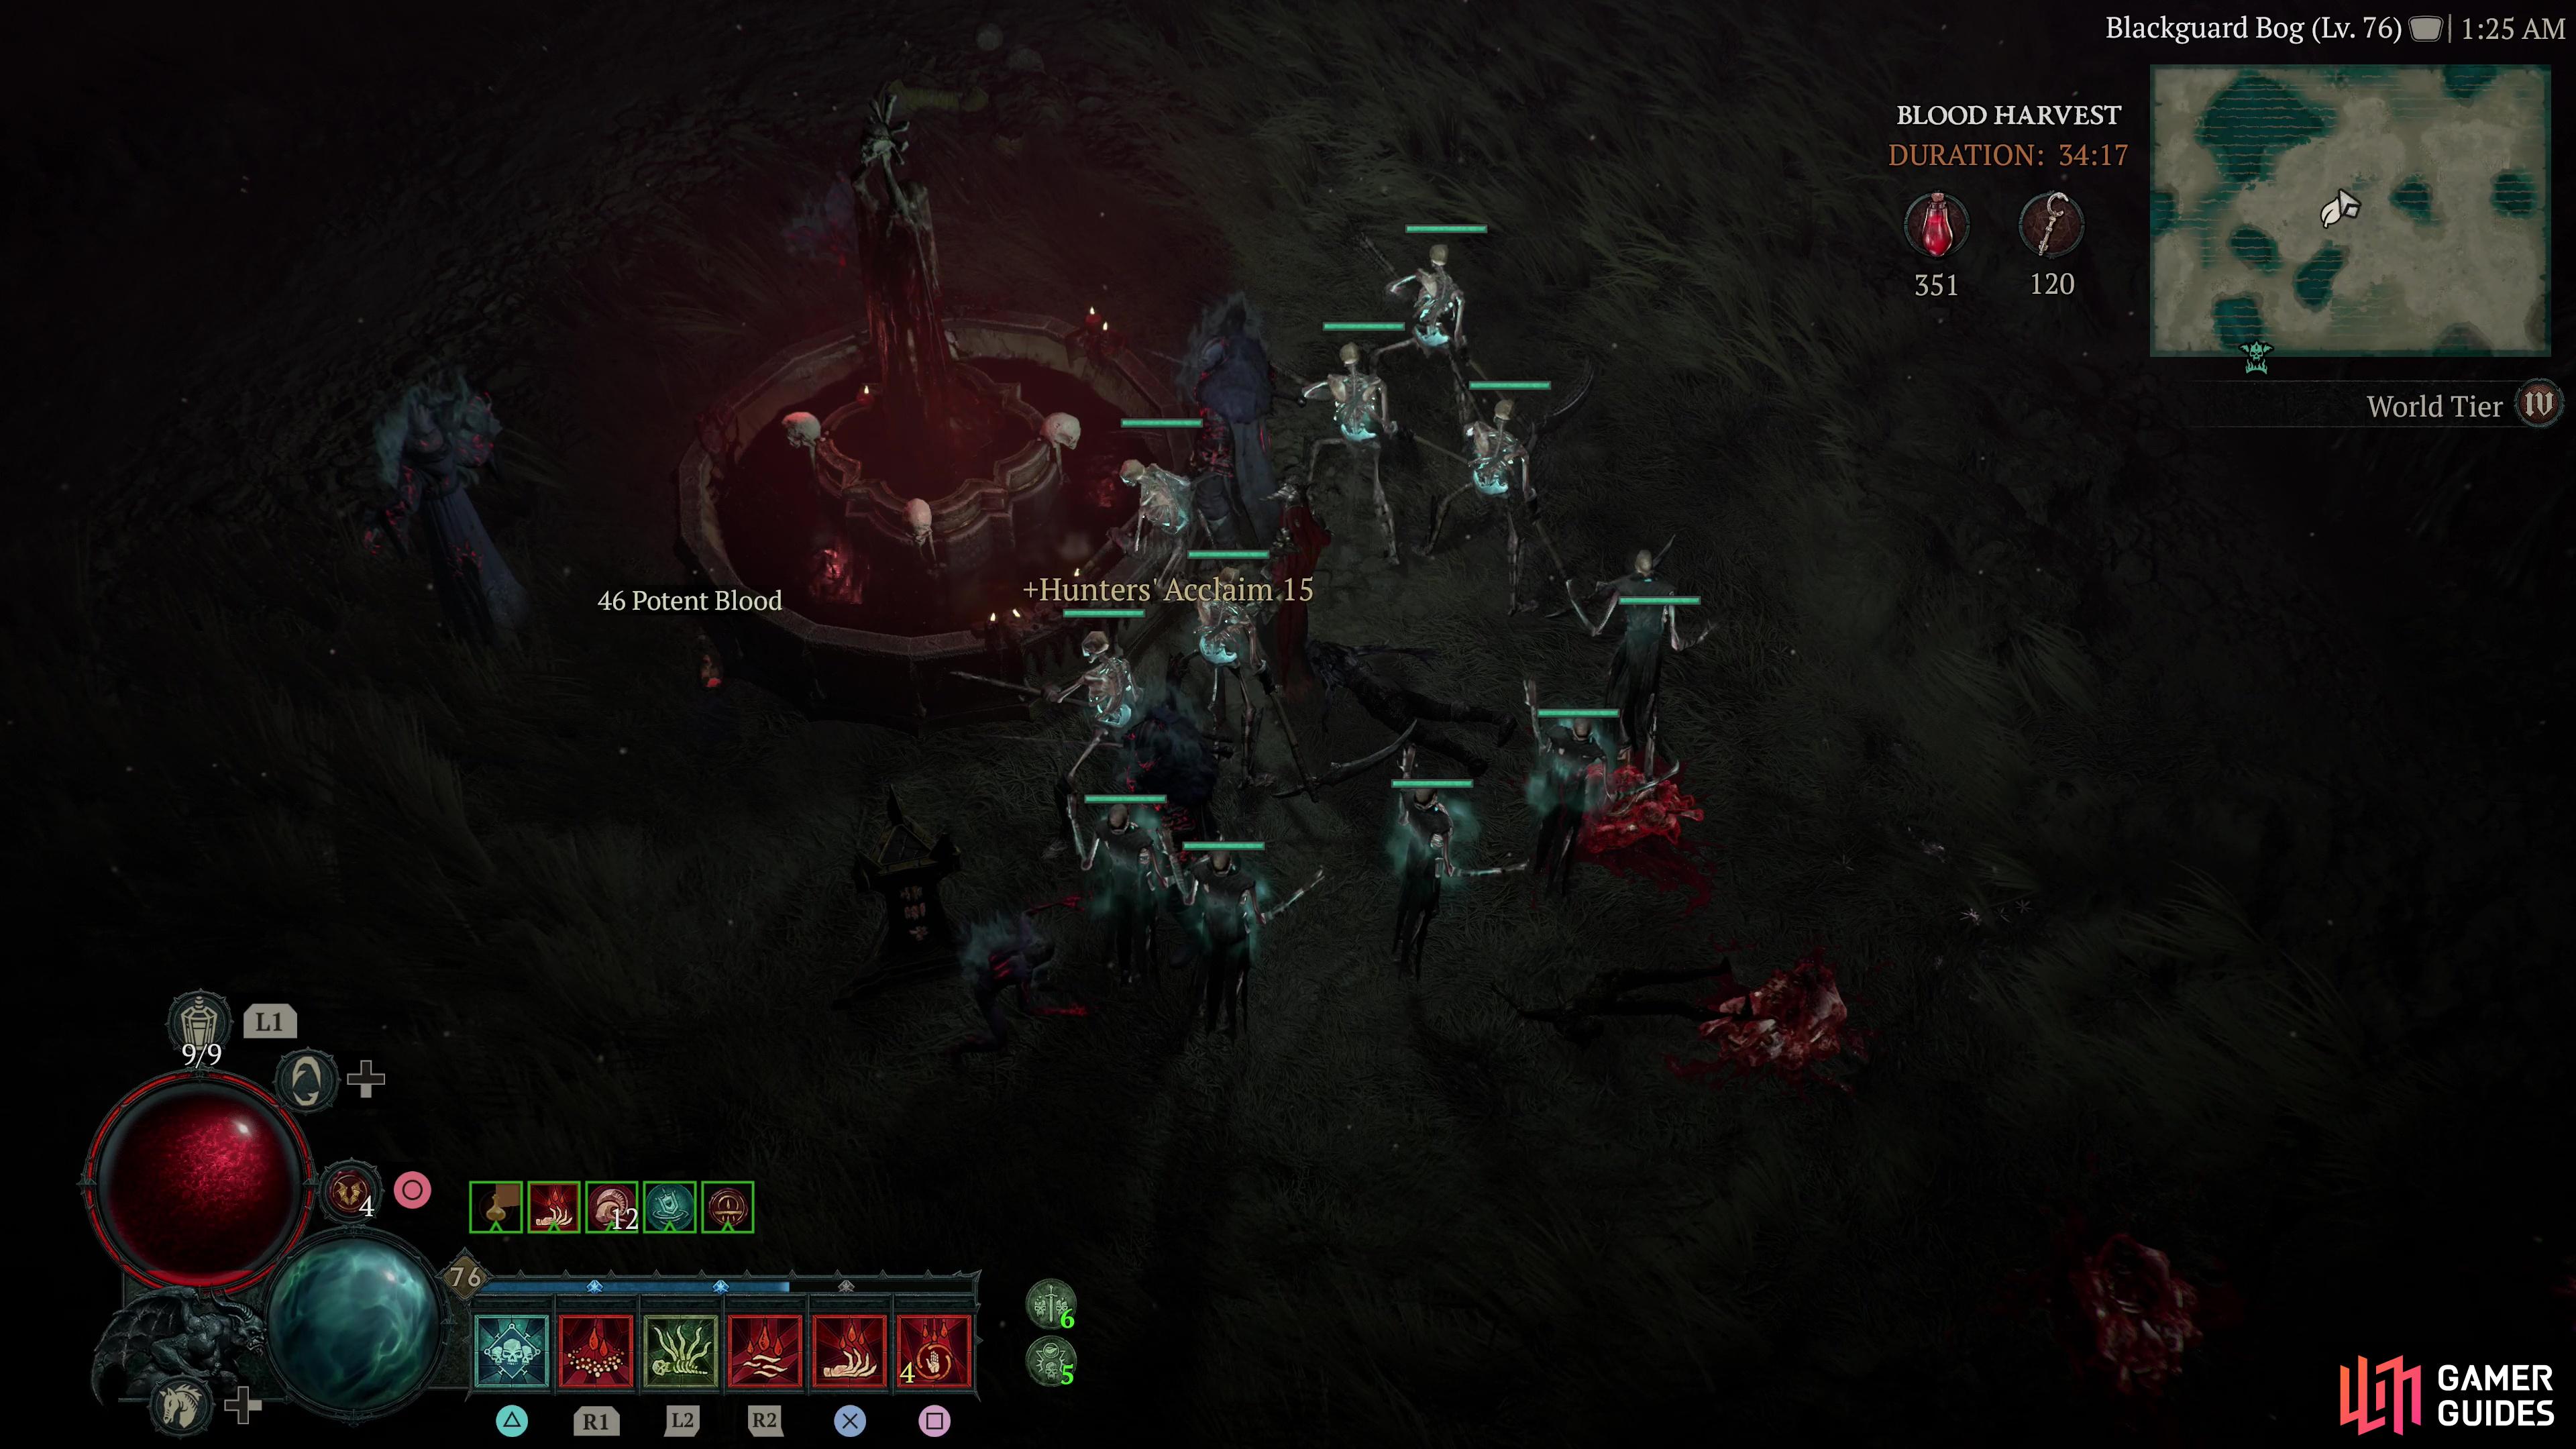 You can get Potent Blood by killing elite vampires, open Seekers Caches and from Blood Wells.